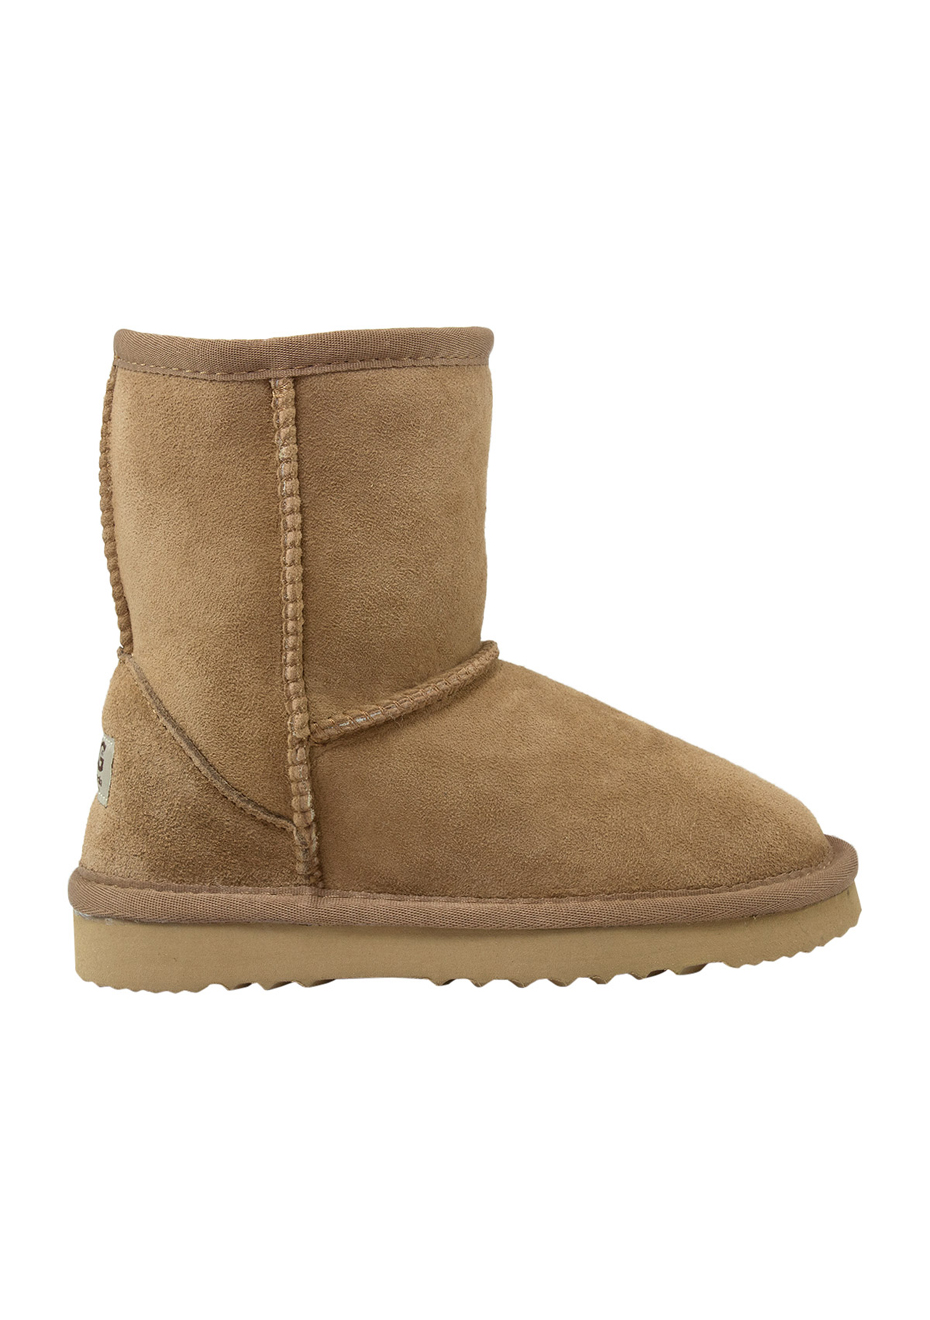 uggs for cheap near me